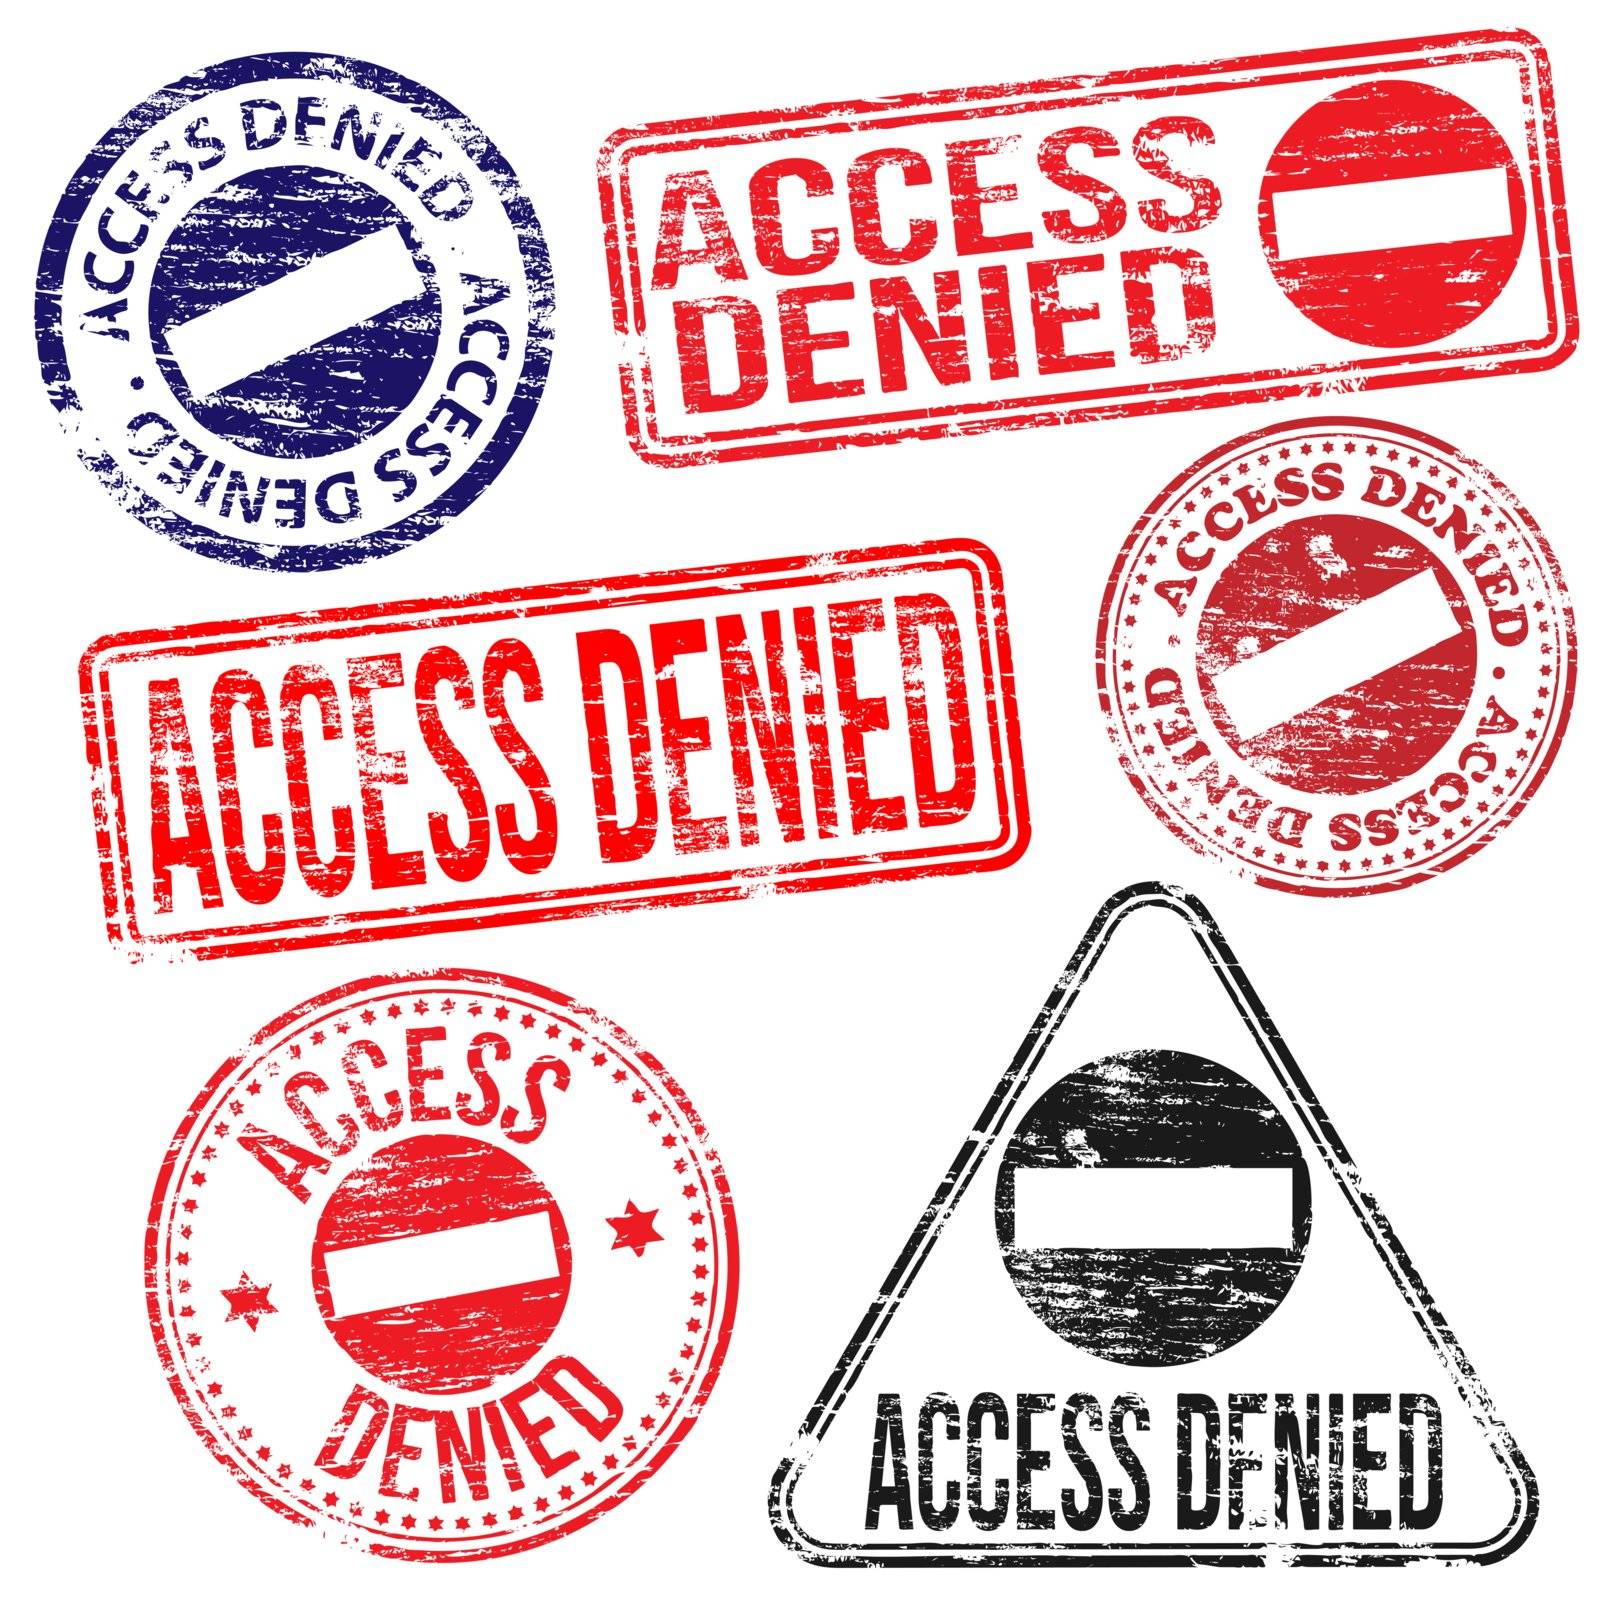 Rectangular and round access denied rubber stamp vectors



